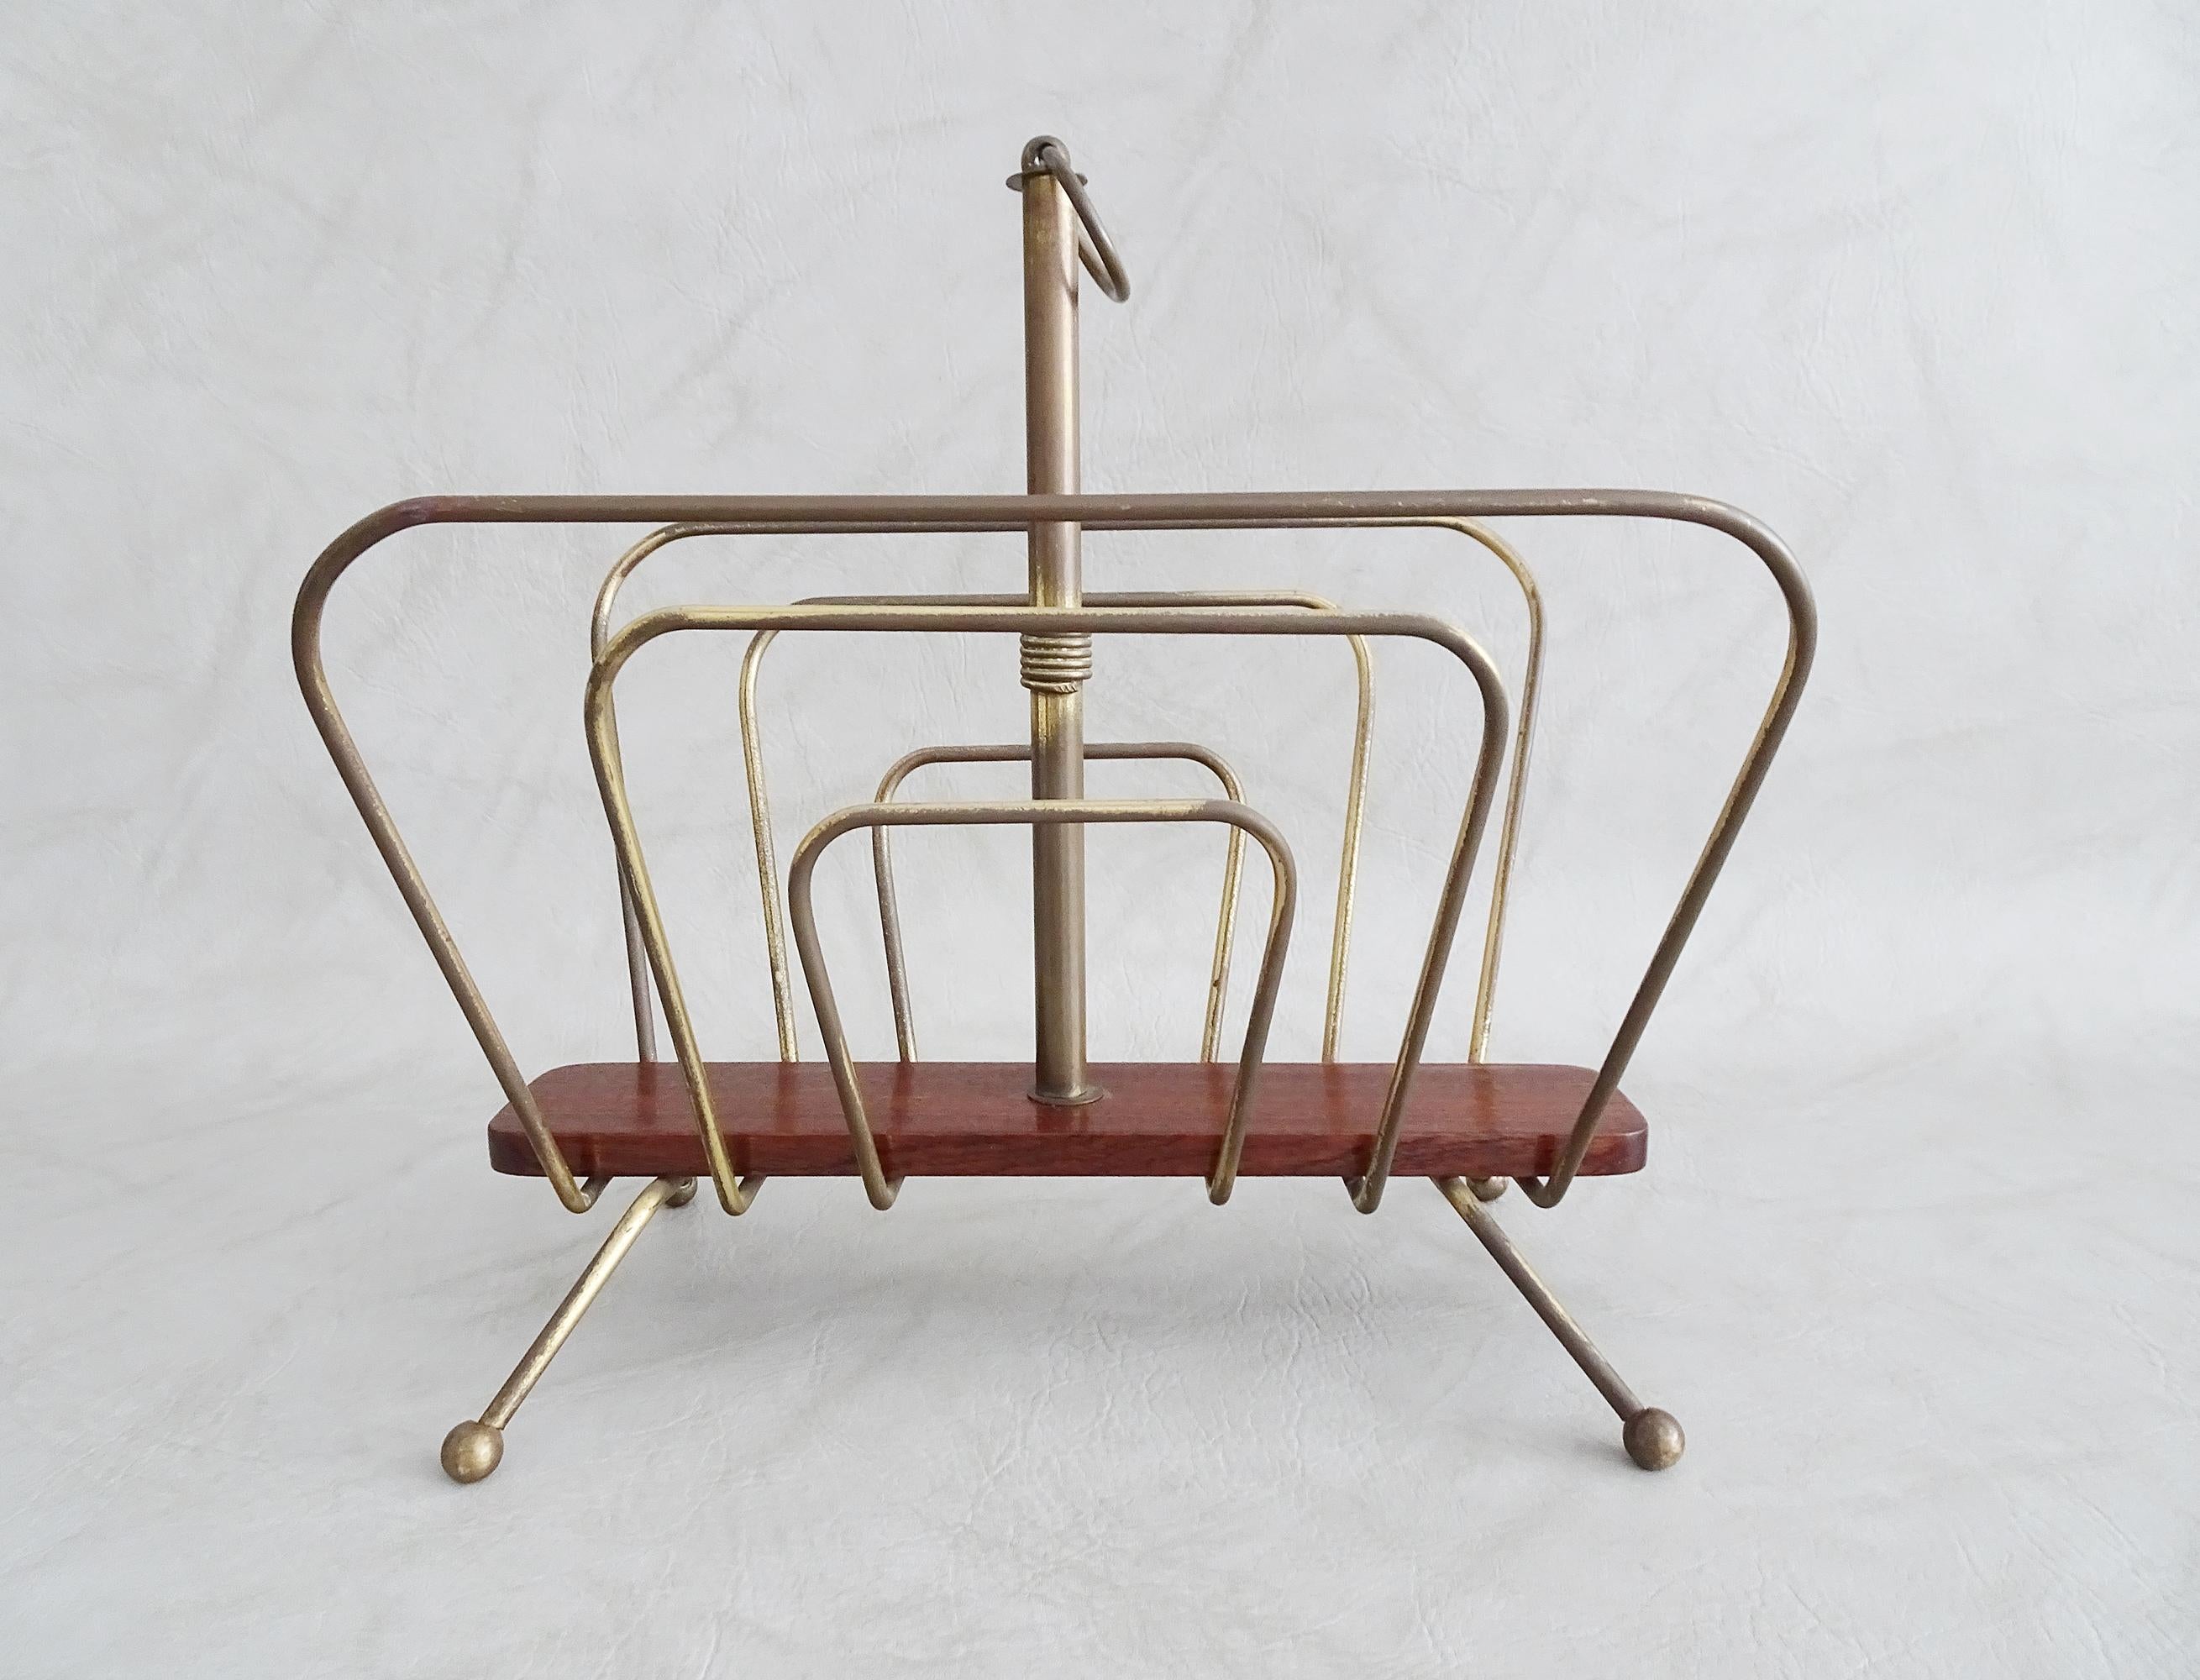 Mid century magazine rack made of brass and wood in the style of Carl Auböck. Sculptural minimalist design made of bent brass rods. Particularly characteristic is the raised stick with a brass ring as a handle, as well as the ball feet. These